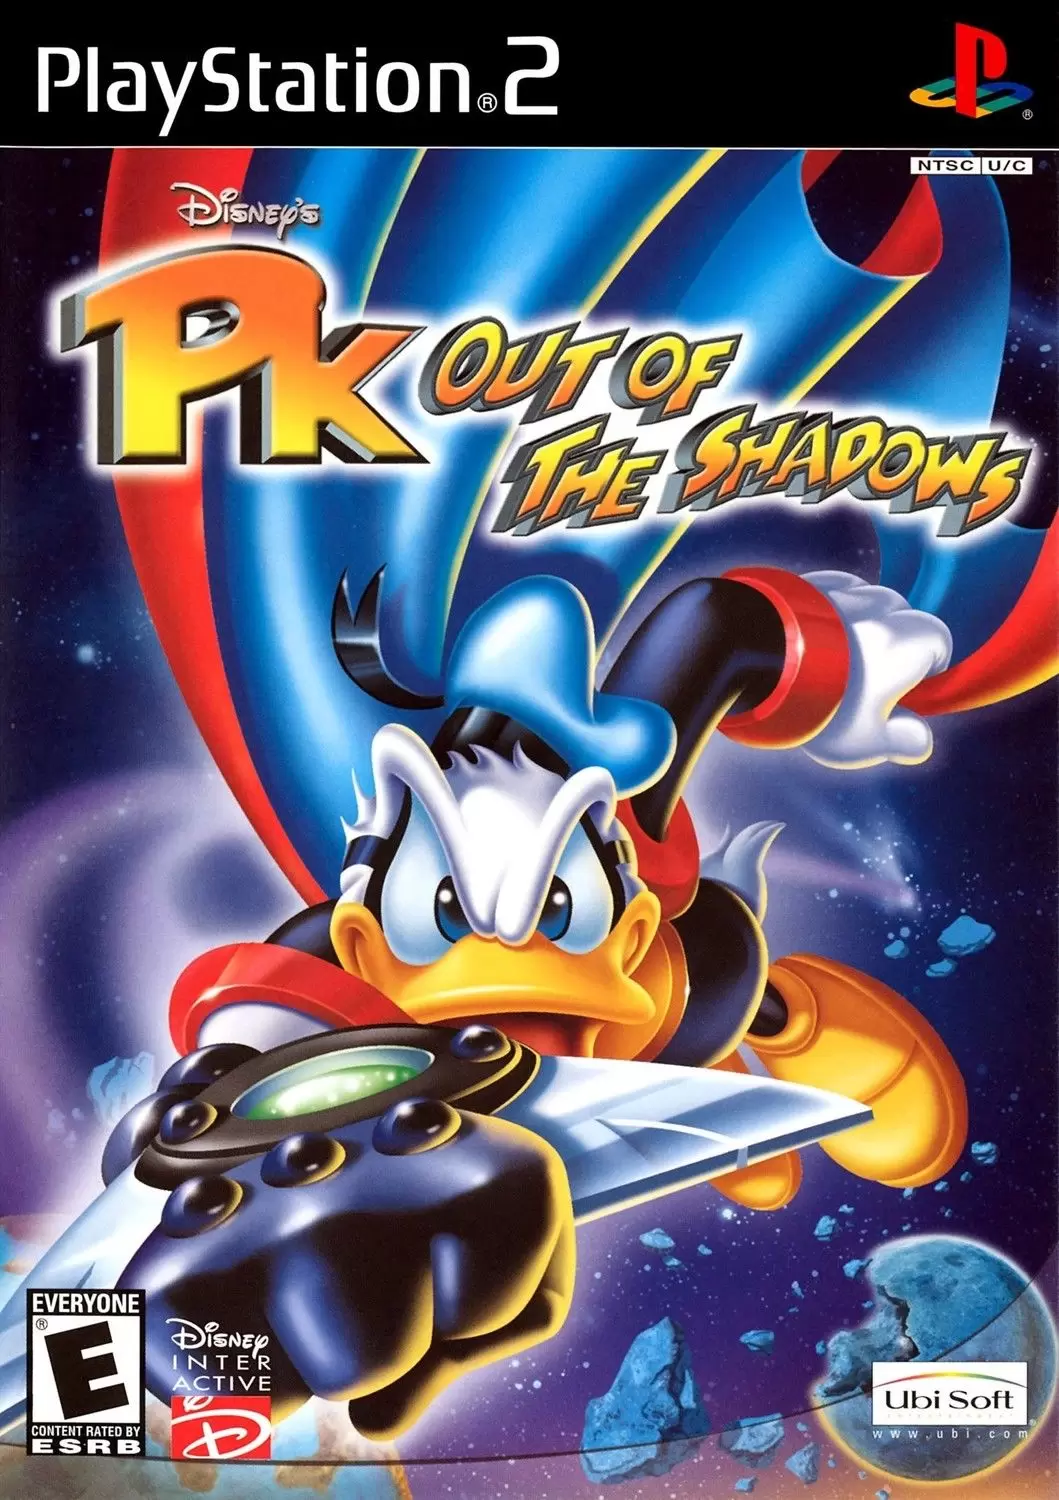 PS2 Games - Disney\'s PK: Out of the Shadows